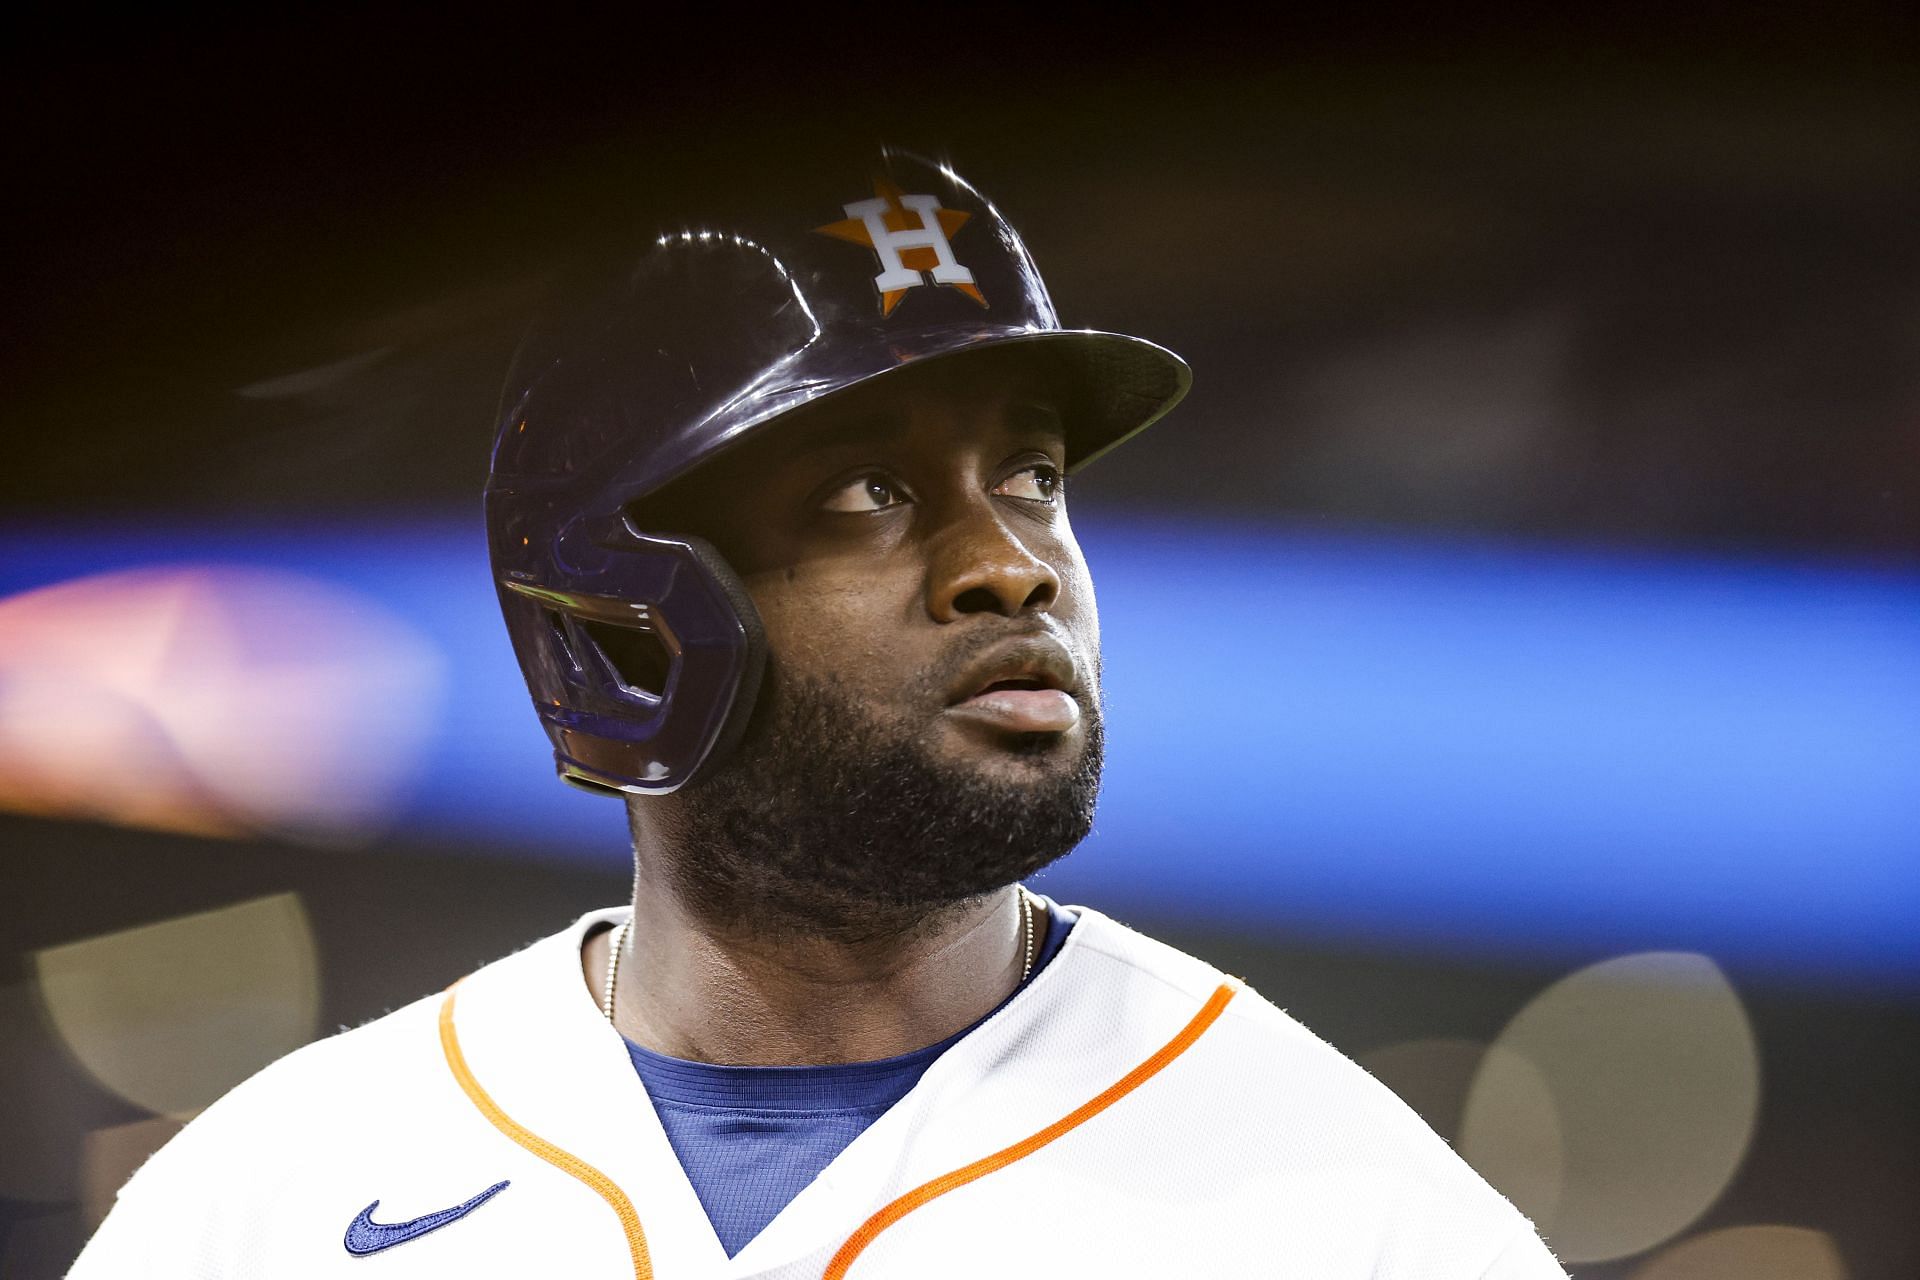 Houston Astros - The Astros have signed OF Yordan Alvarez to a six-year  contract extension covering the 2023-2028 seasons, General Manager James  Click announced today.